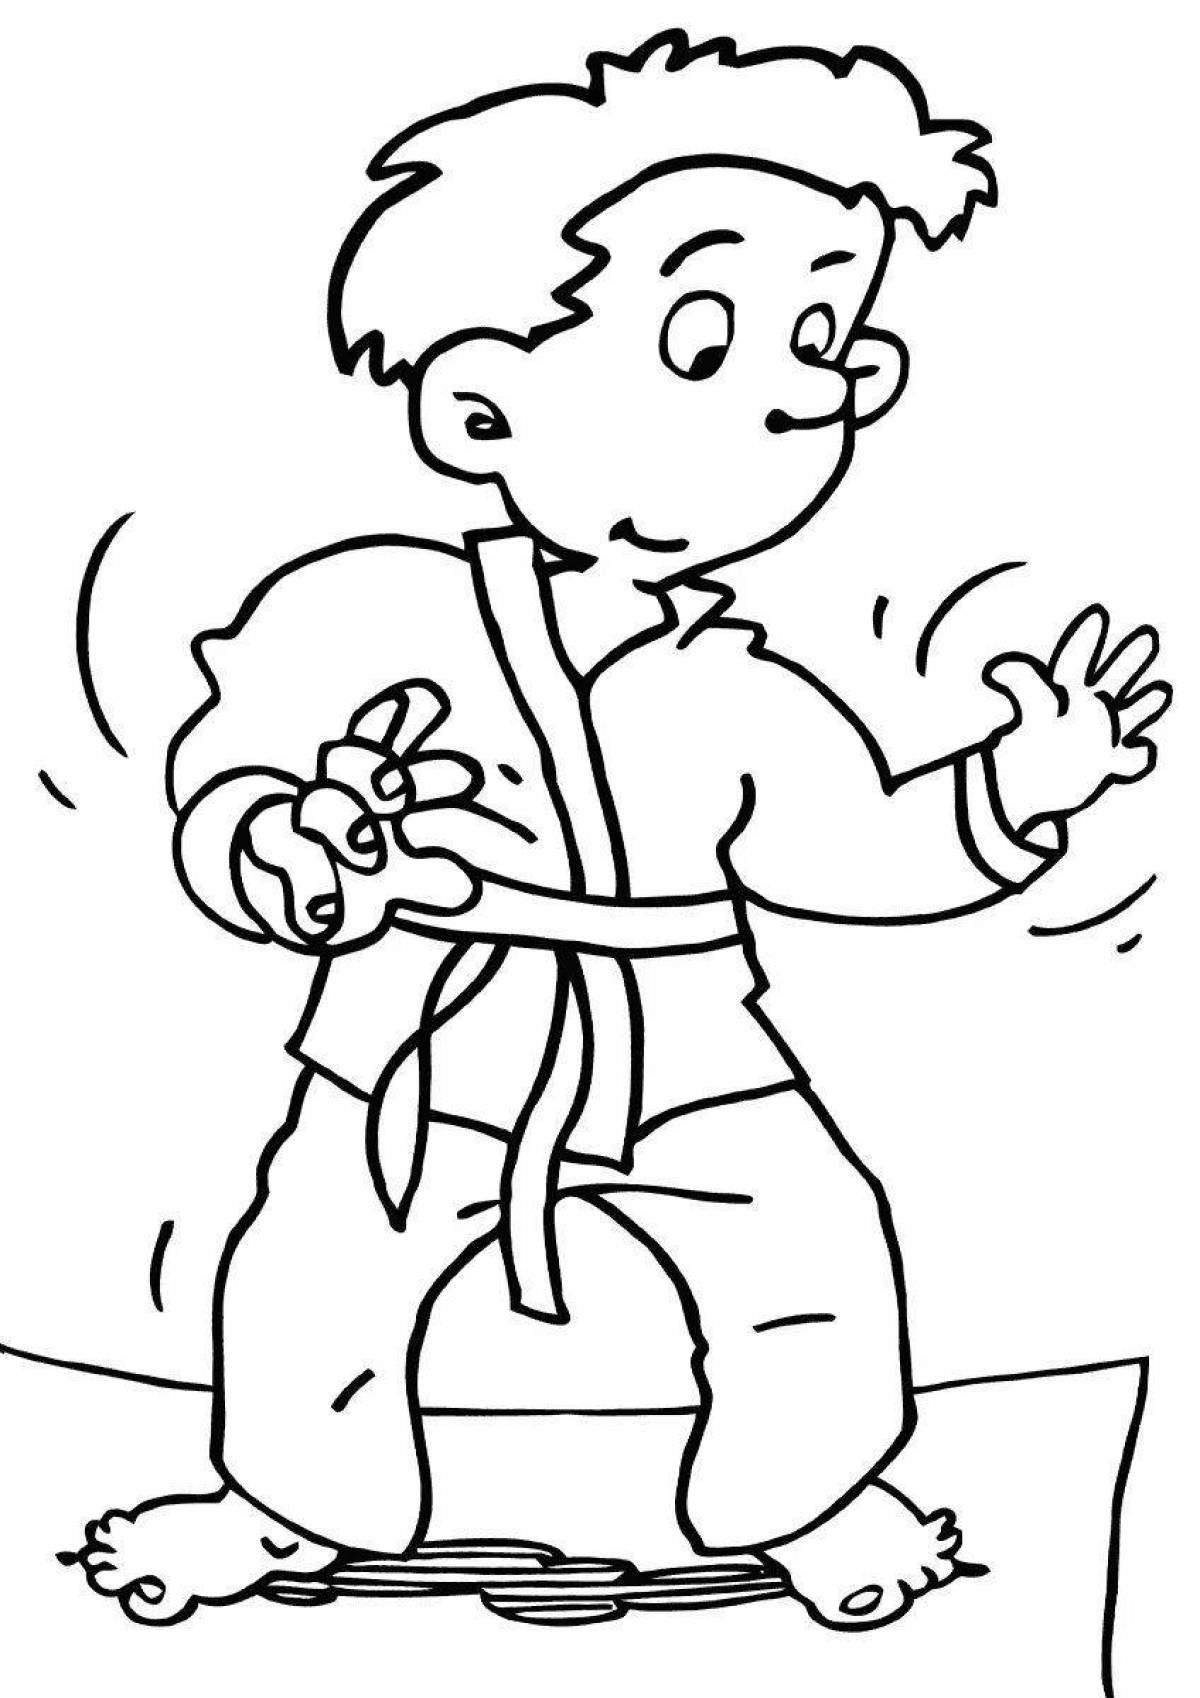 Playful karate coloring page for kids